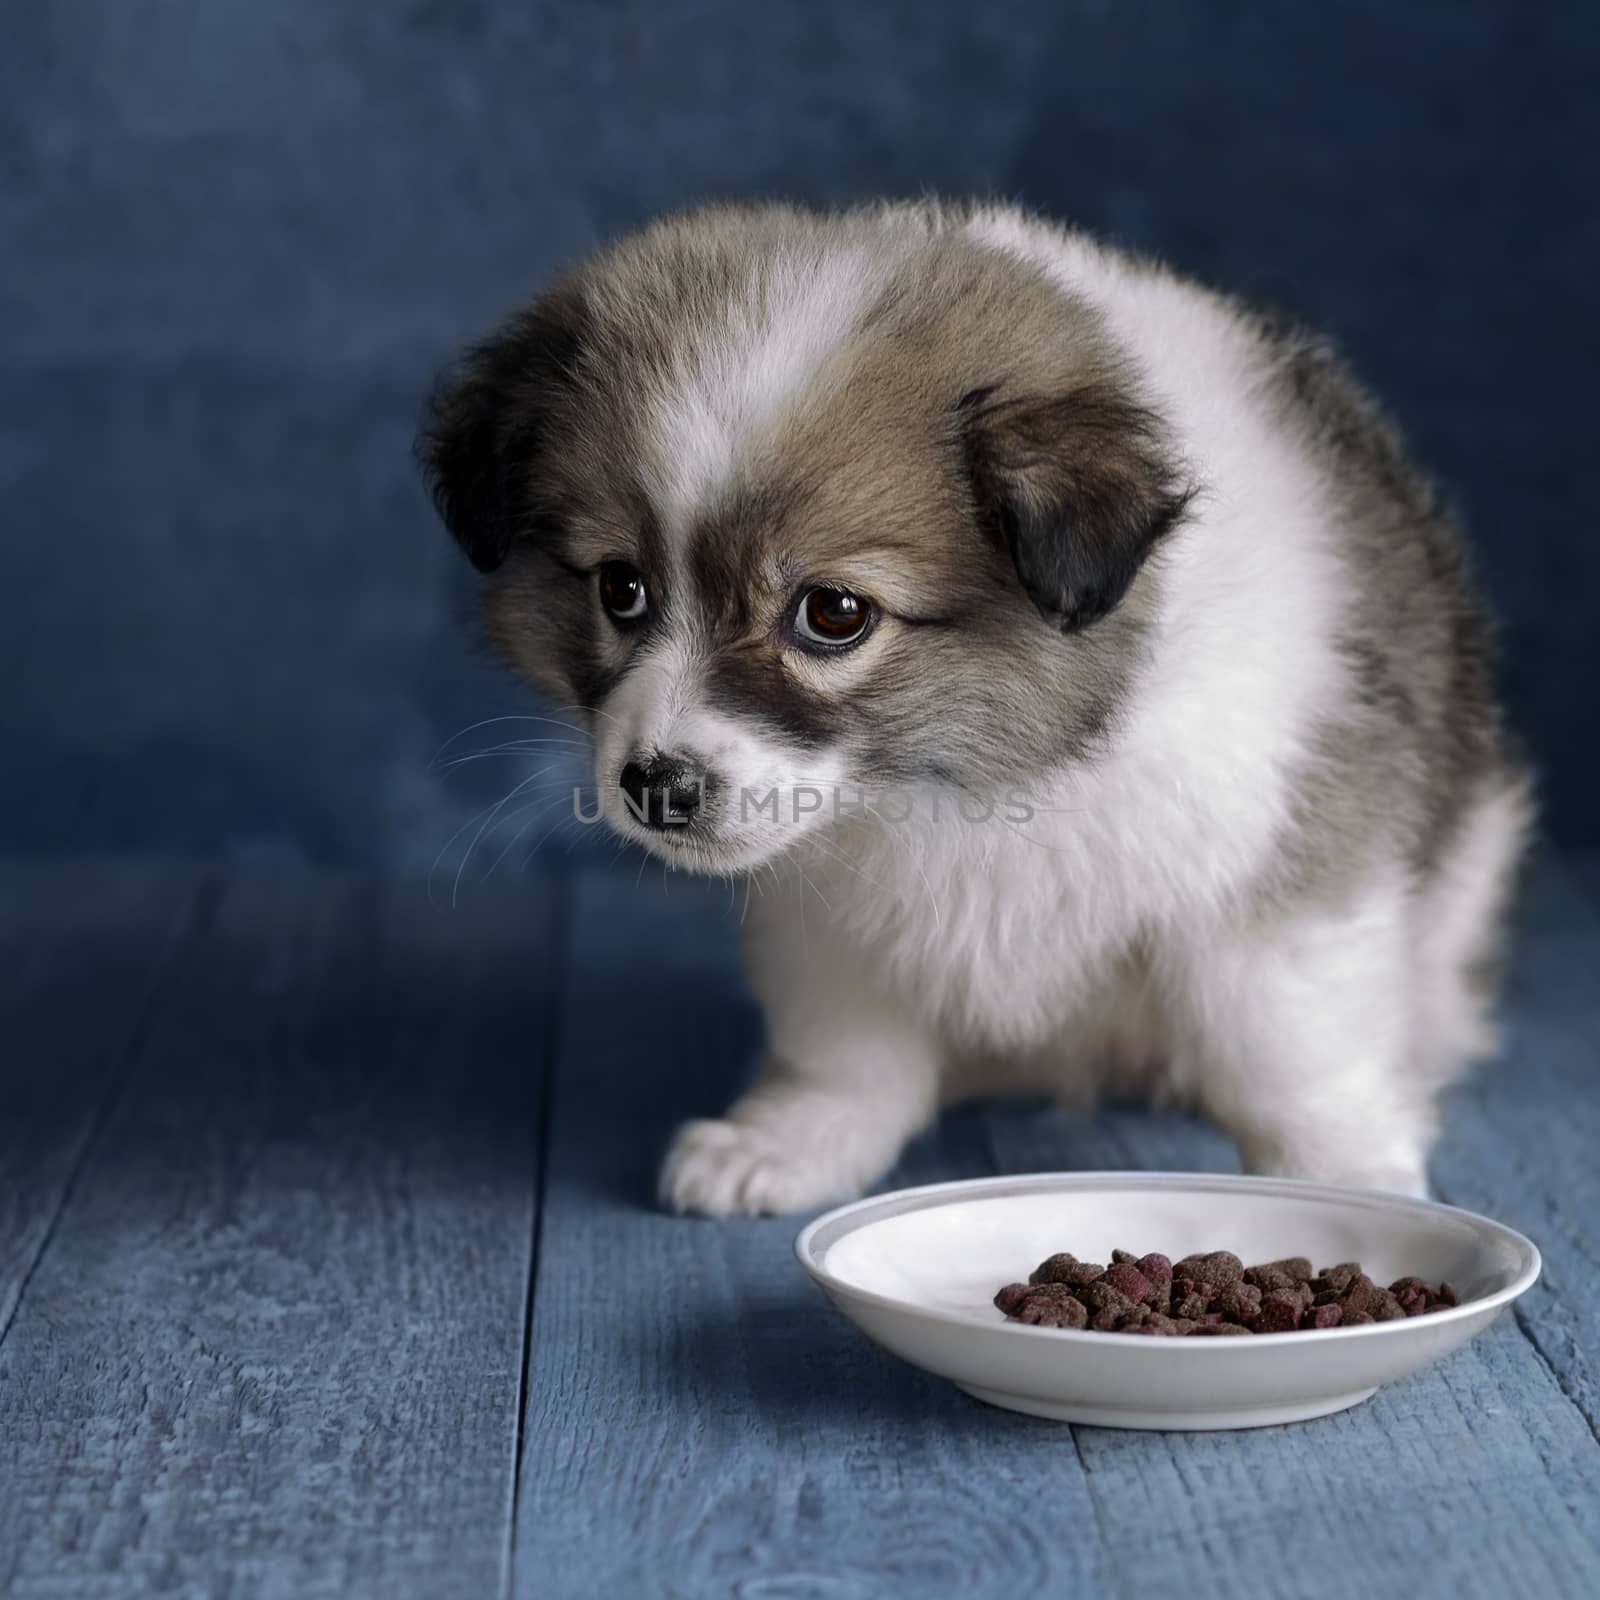 Small fluffy puppy sits next to a plate of food on the wooden floor. Background toned in blue color, selective focus.